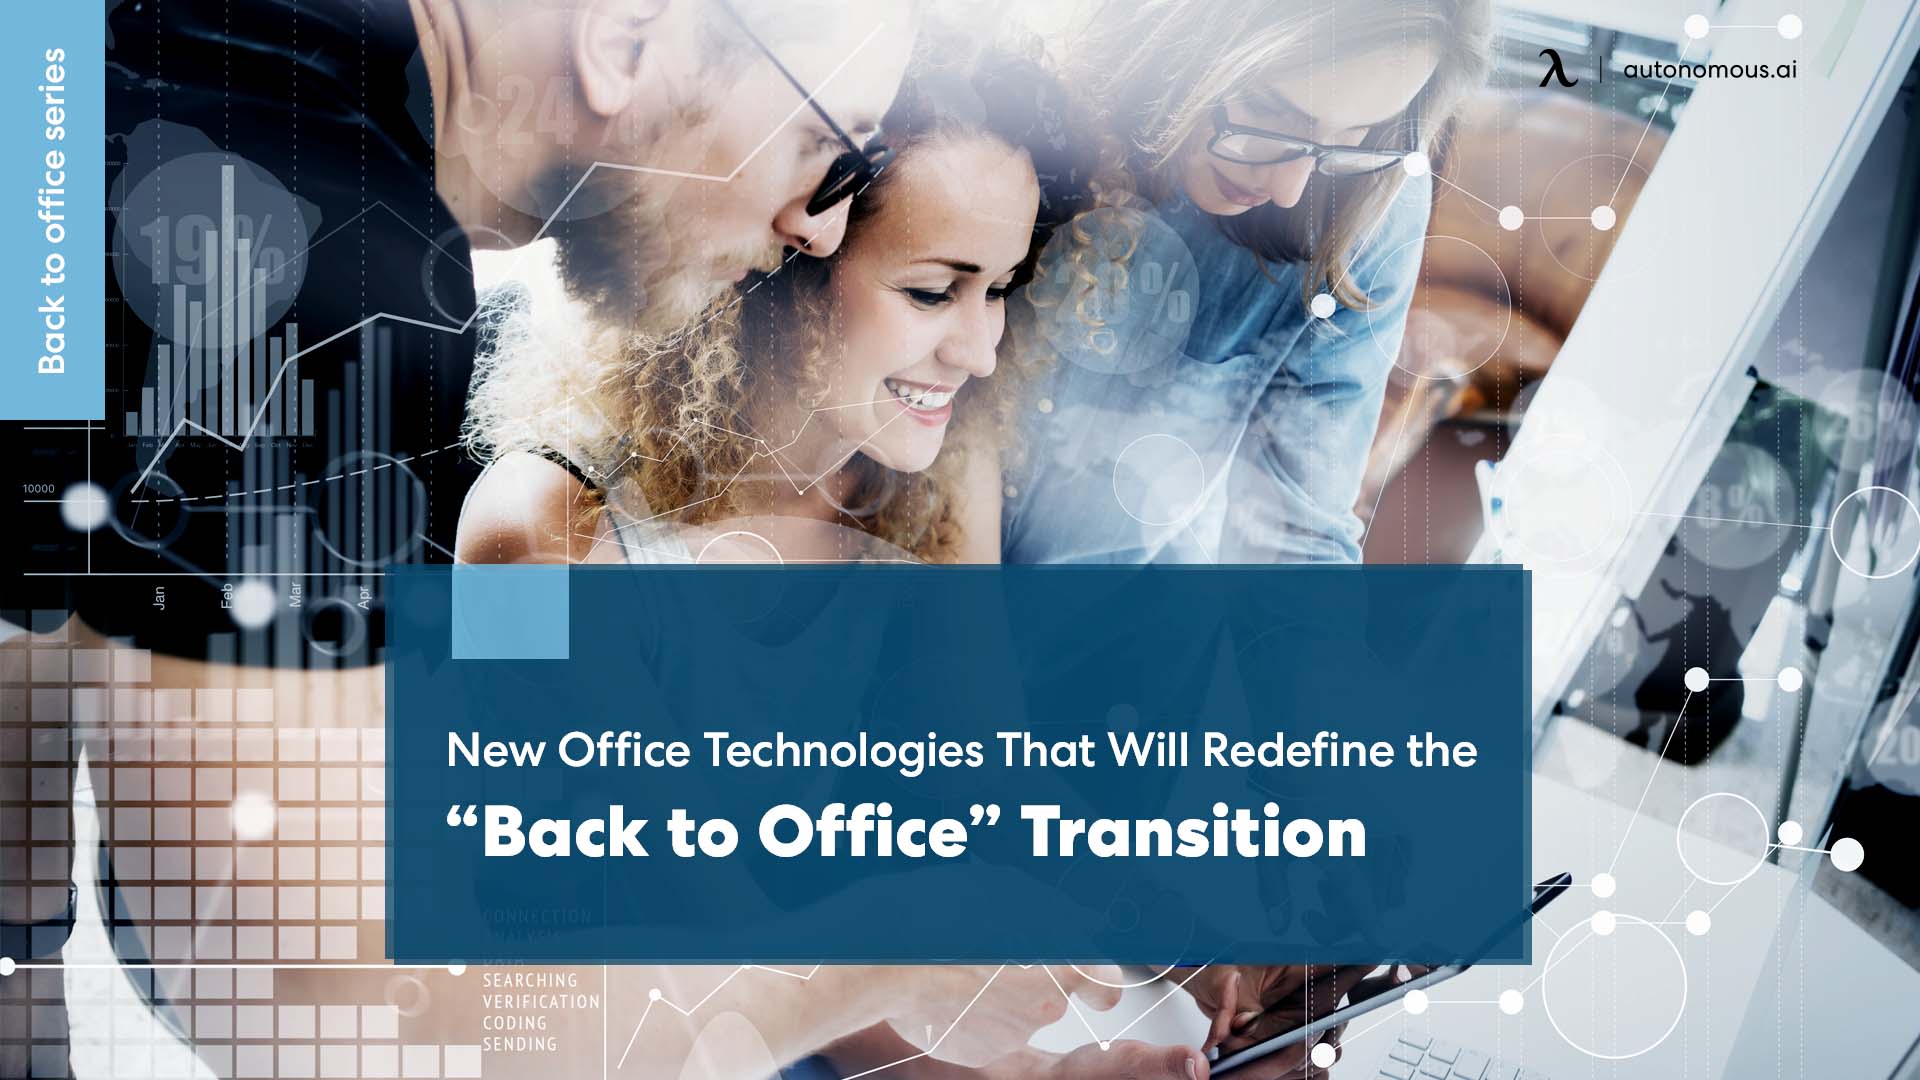 New Office Technologies That Will Redefine the “Back to the Office” Transition